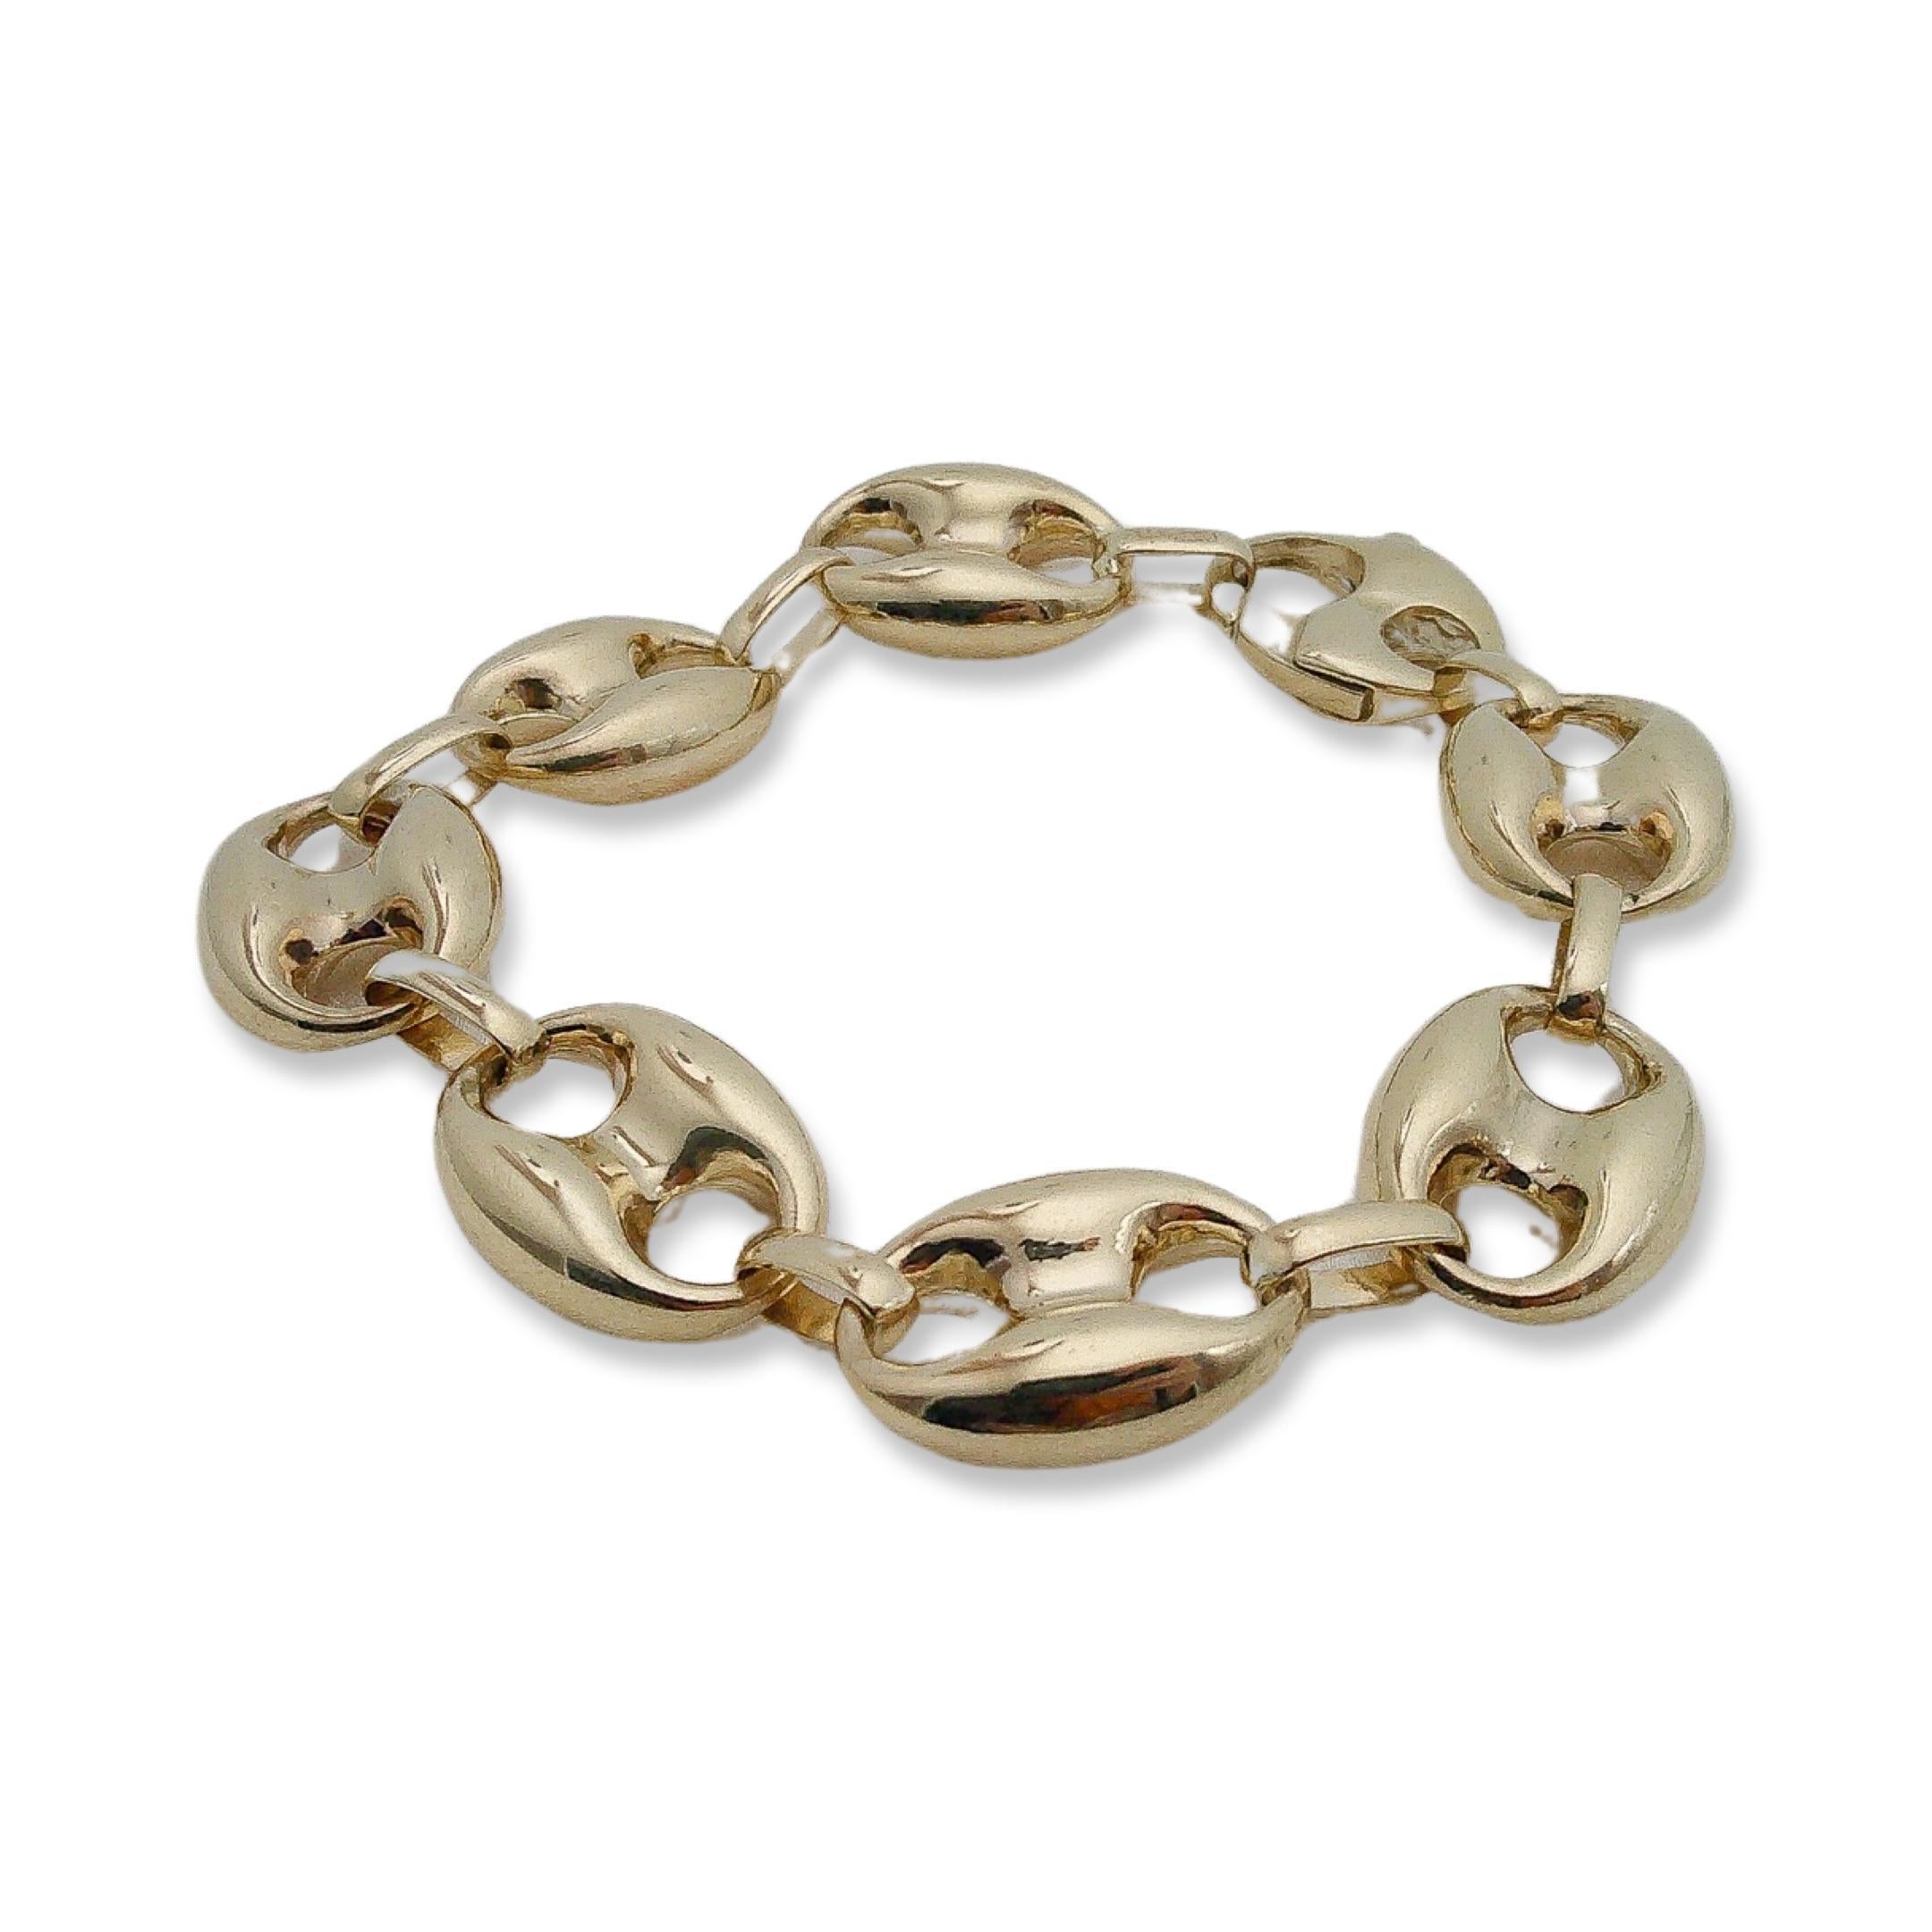 Journey through time and across the picturesque landscapes of Italy with our mesmerizing Vintage Puff Link Bracelet, brilliantly crafted in the heart of Italian artisanal traditions and set in opulent 14K gold. Every 16mm link is a canvas, capturing